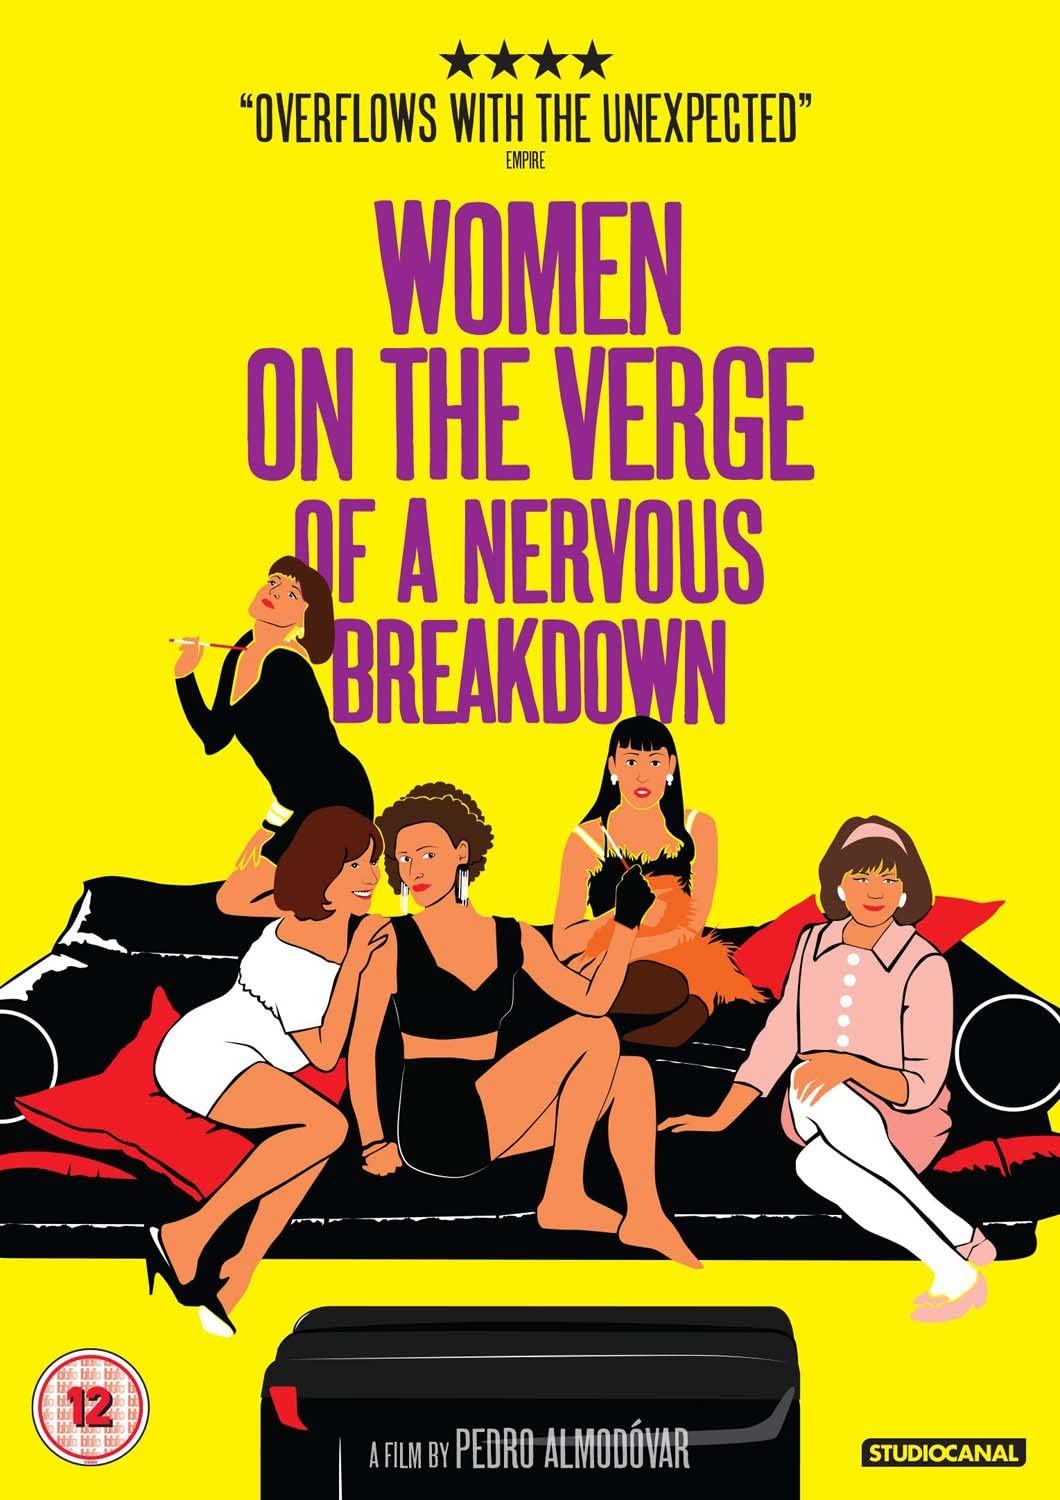 Women on The Verge Of A Nervous Breakdown [2017] - Drama/Comedy [DVD]